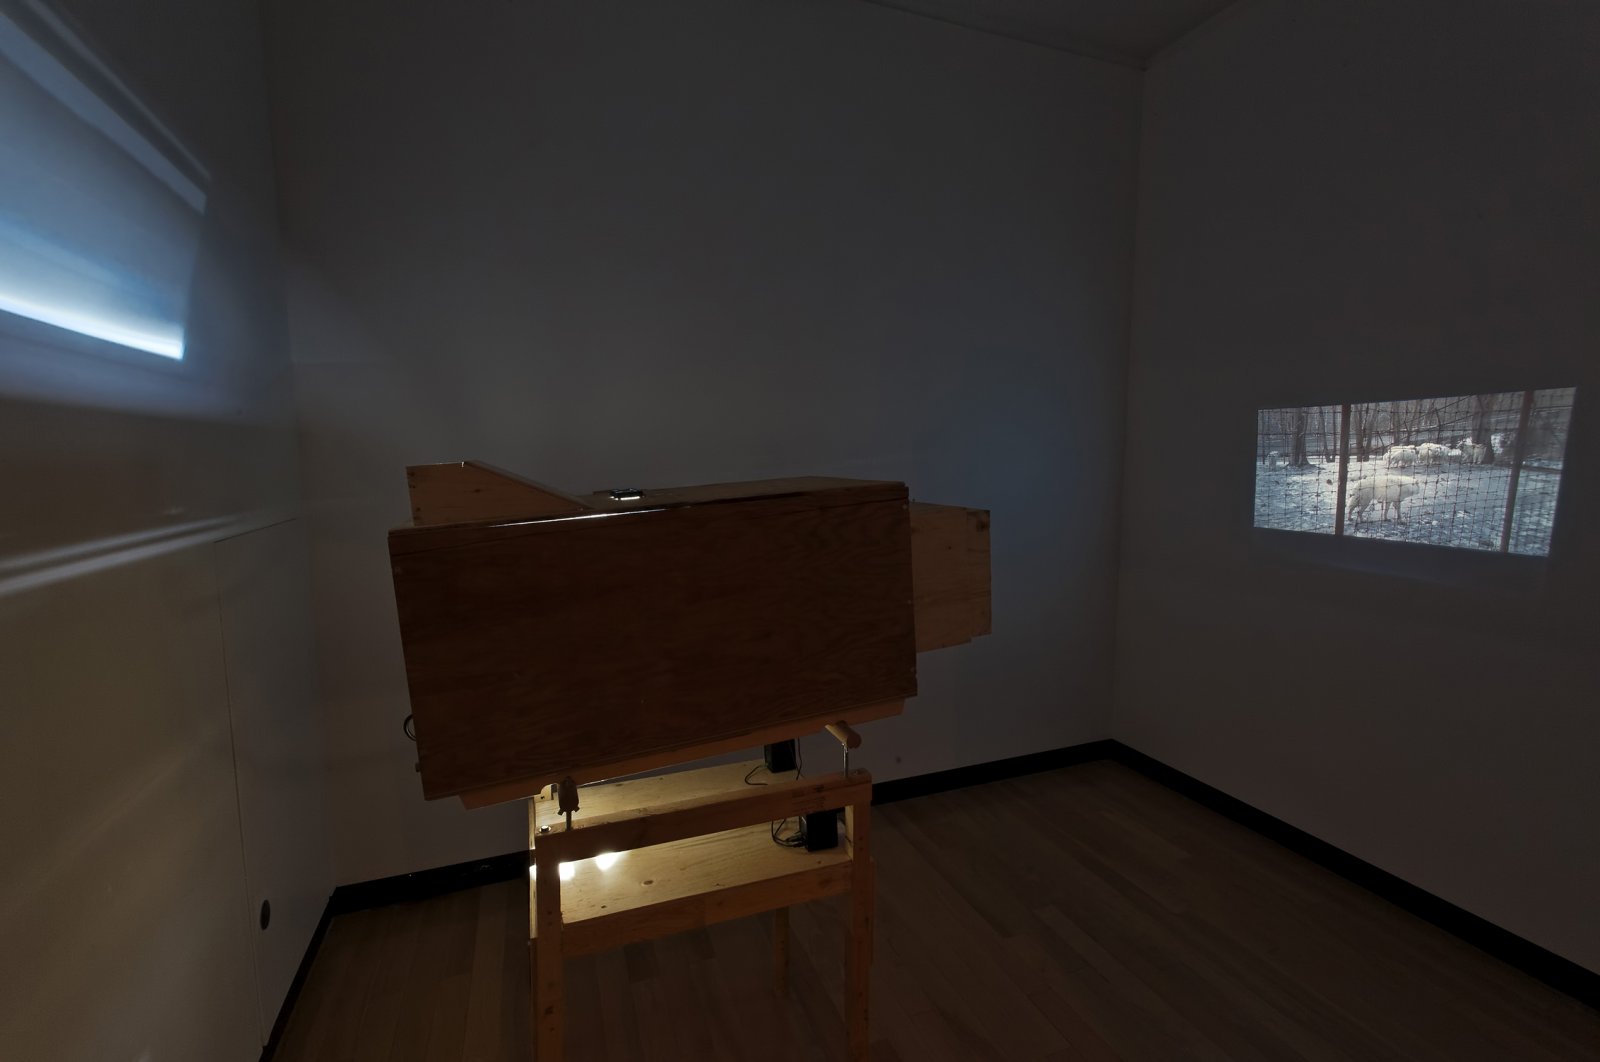 Kevin Schmidt, Sad Wolf, 2006, custom-made HD video projector, 48 x 24 x 48 in. (122 x 61 x 122 cm), HD video, 4 minutes, 11 seconds. Installation view, Don't Stop Believing,	Justina M. Barnicke Gallery, Toronto, 2011